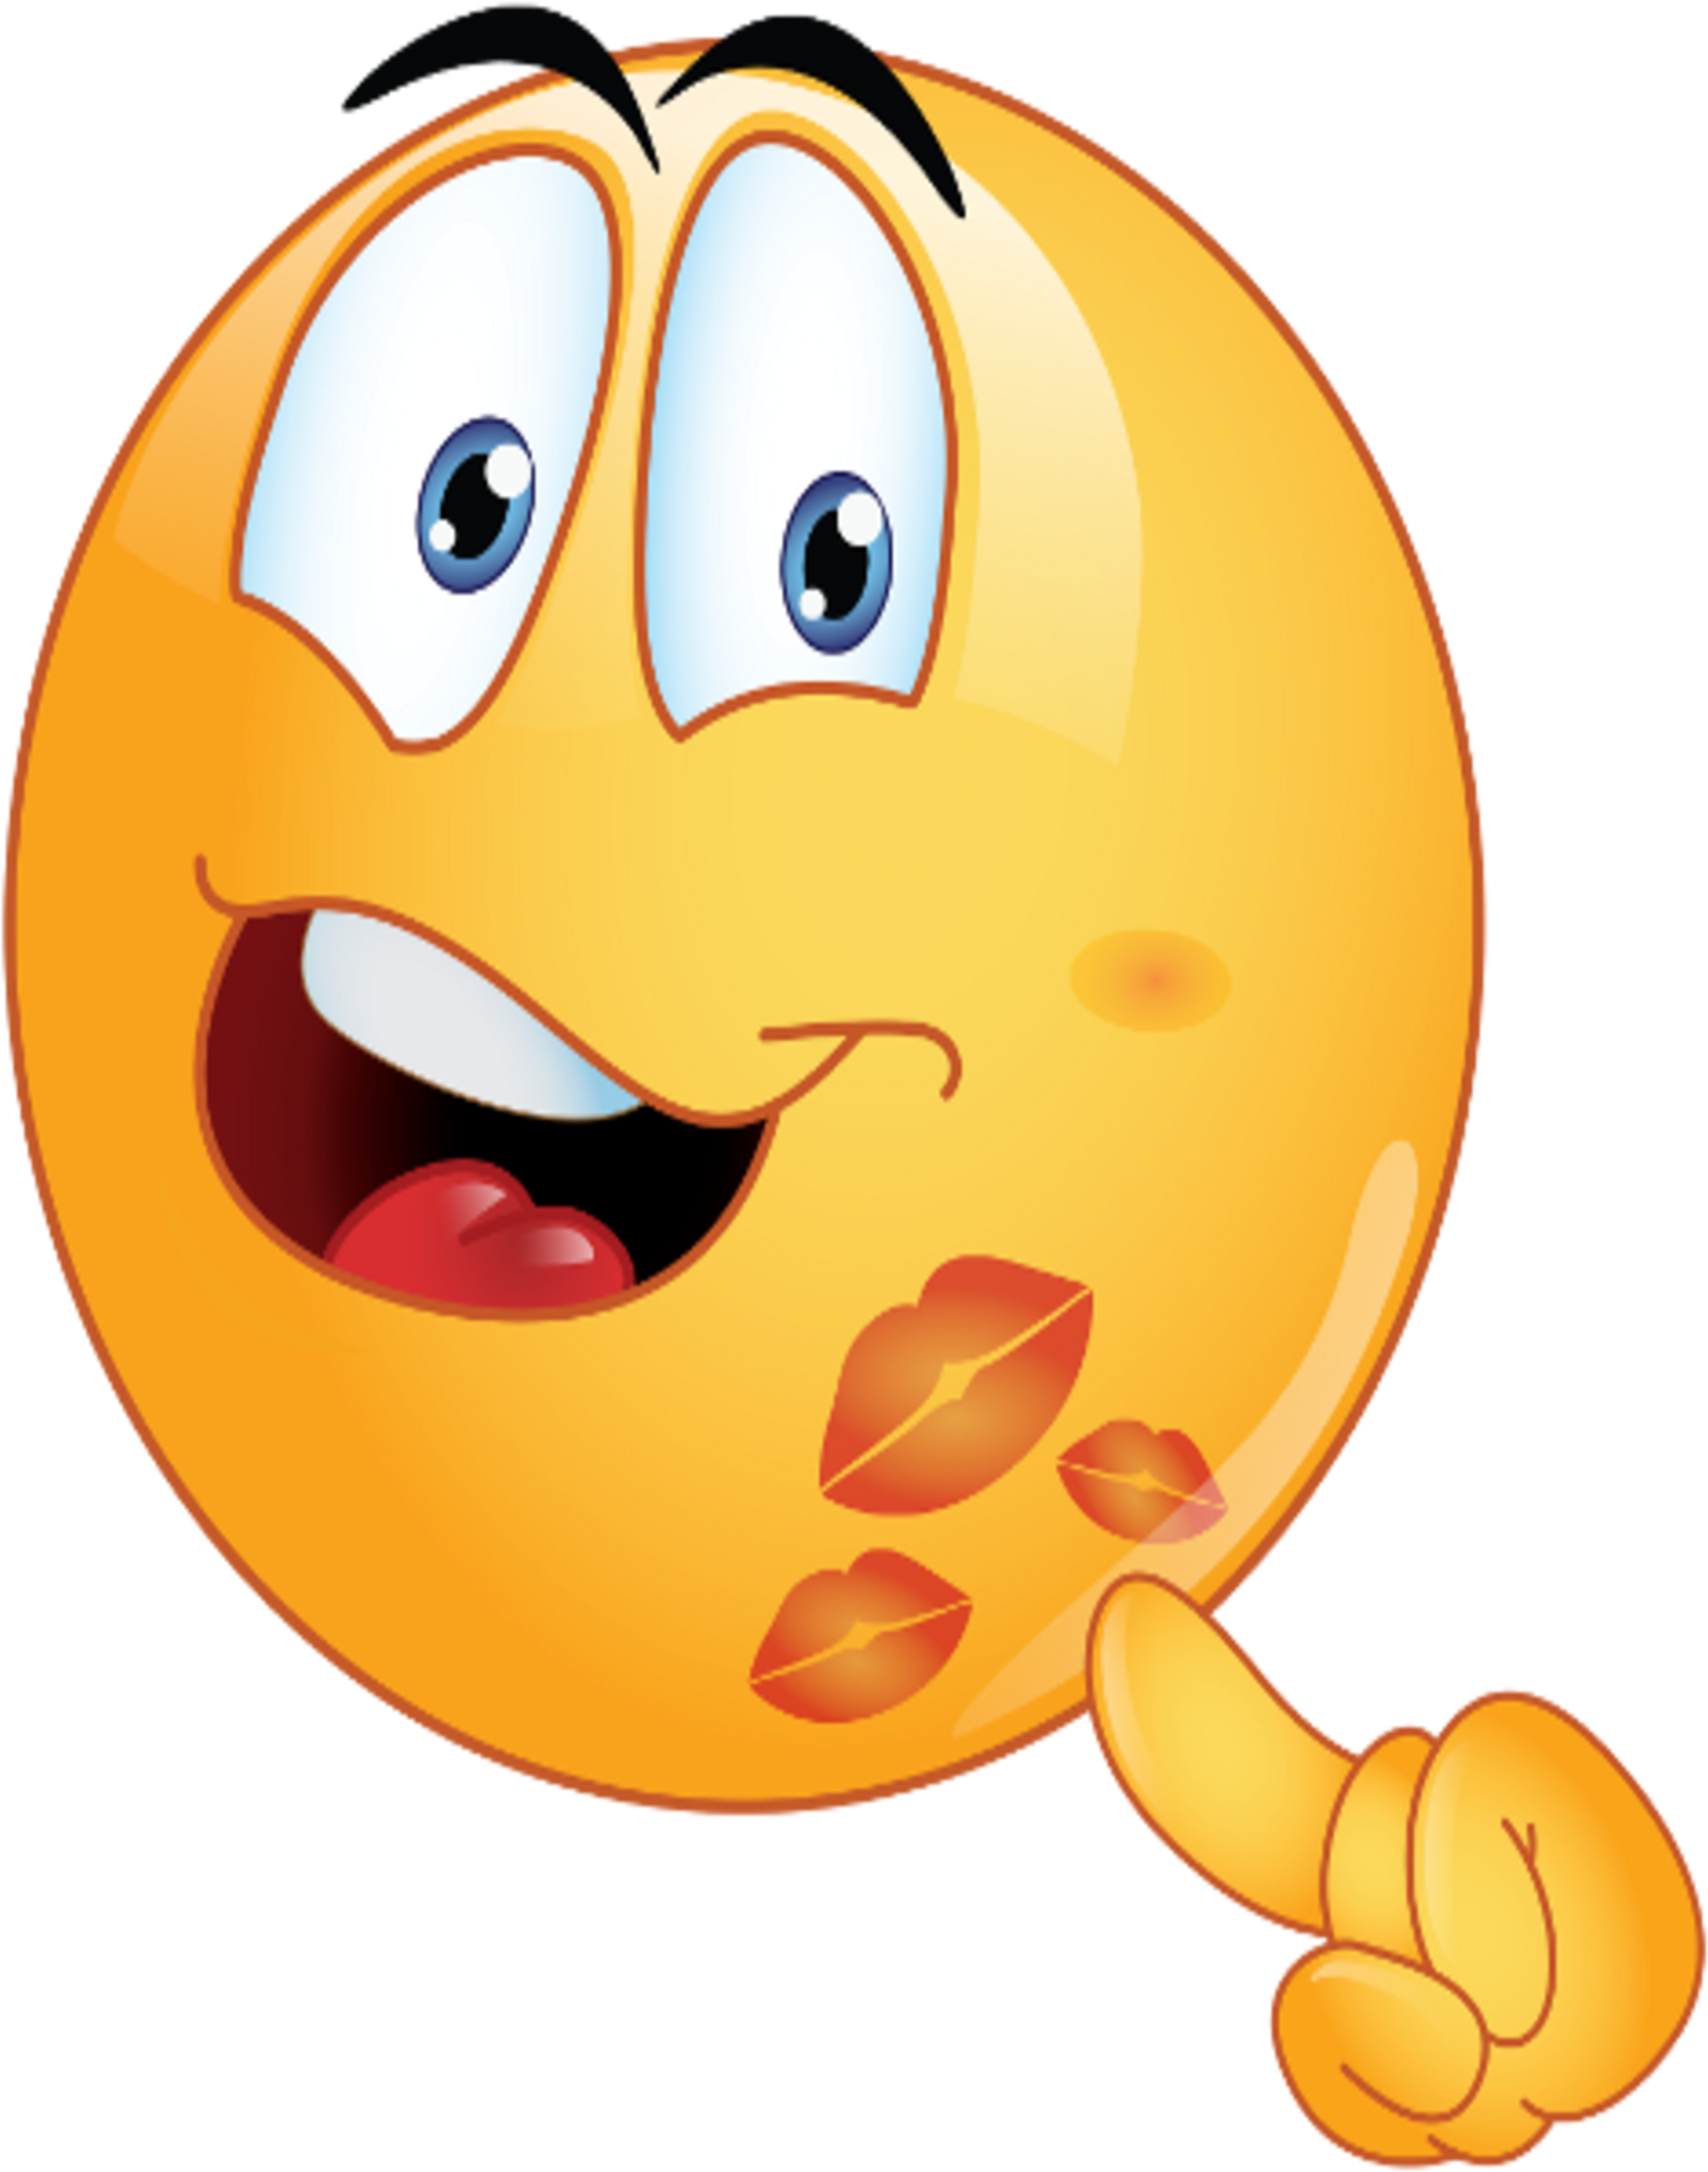 Winking Emoji Giving Thumbs Up PNG